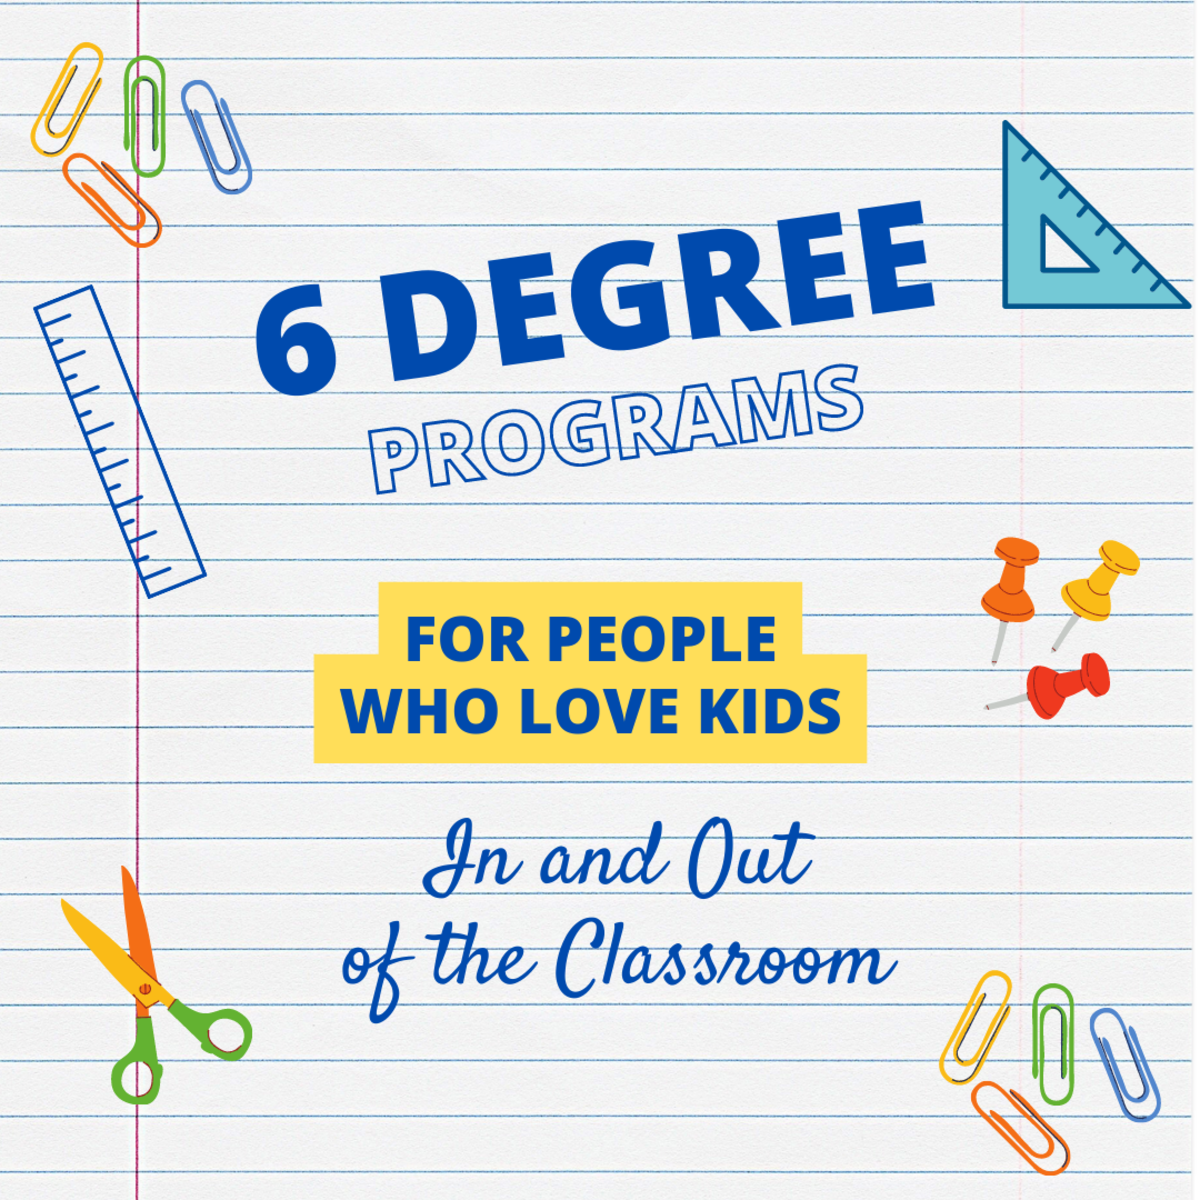 Six Degree Programs for People Who Love Kids